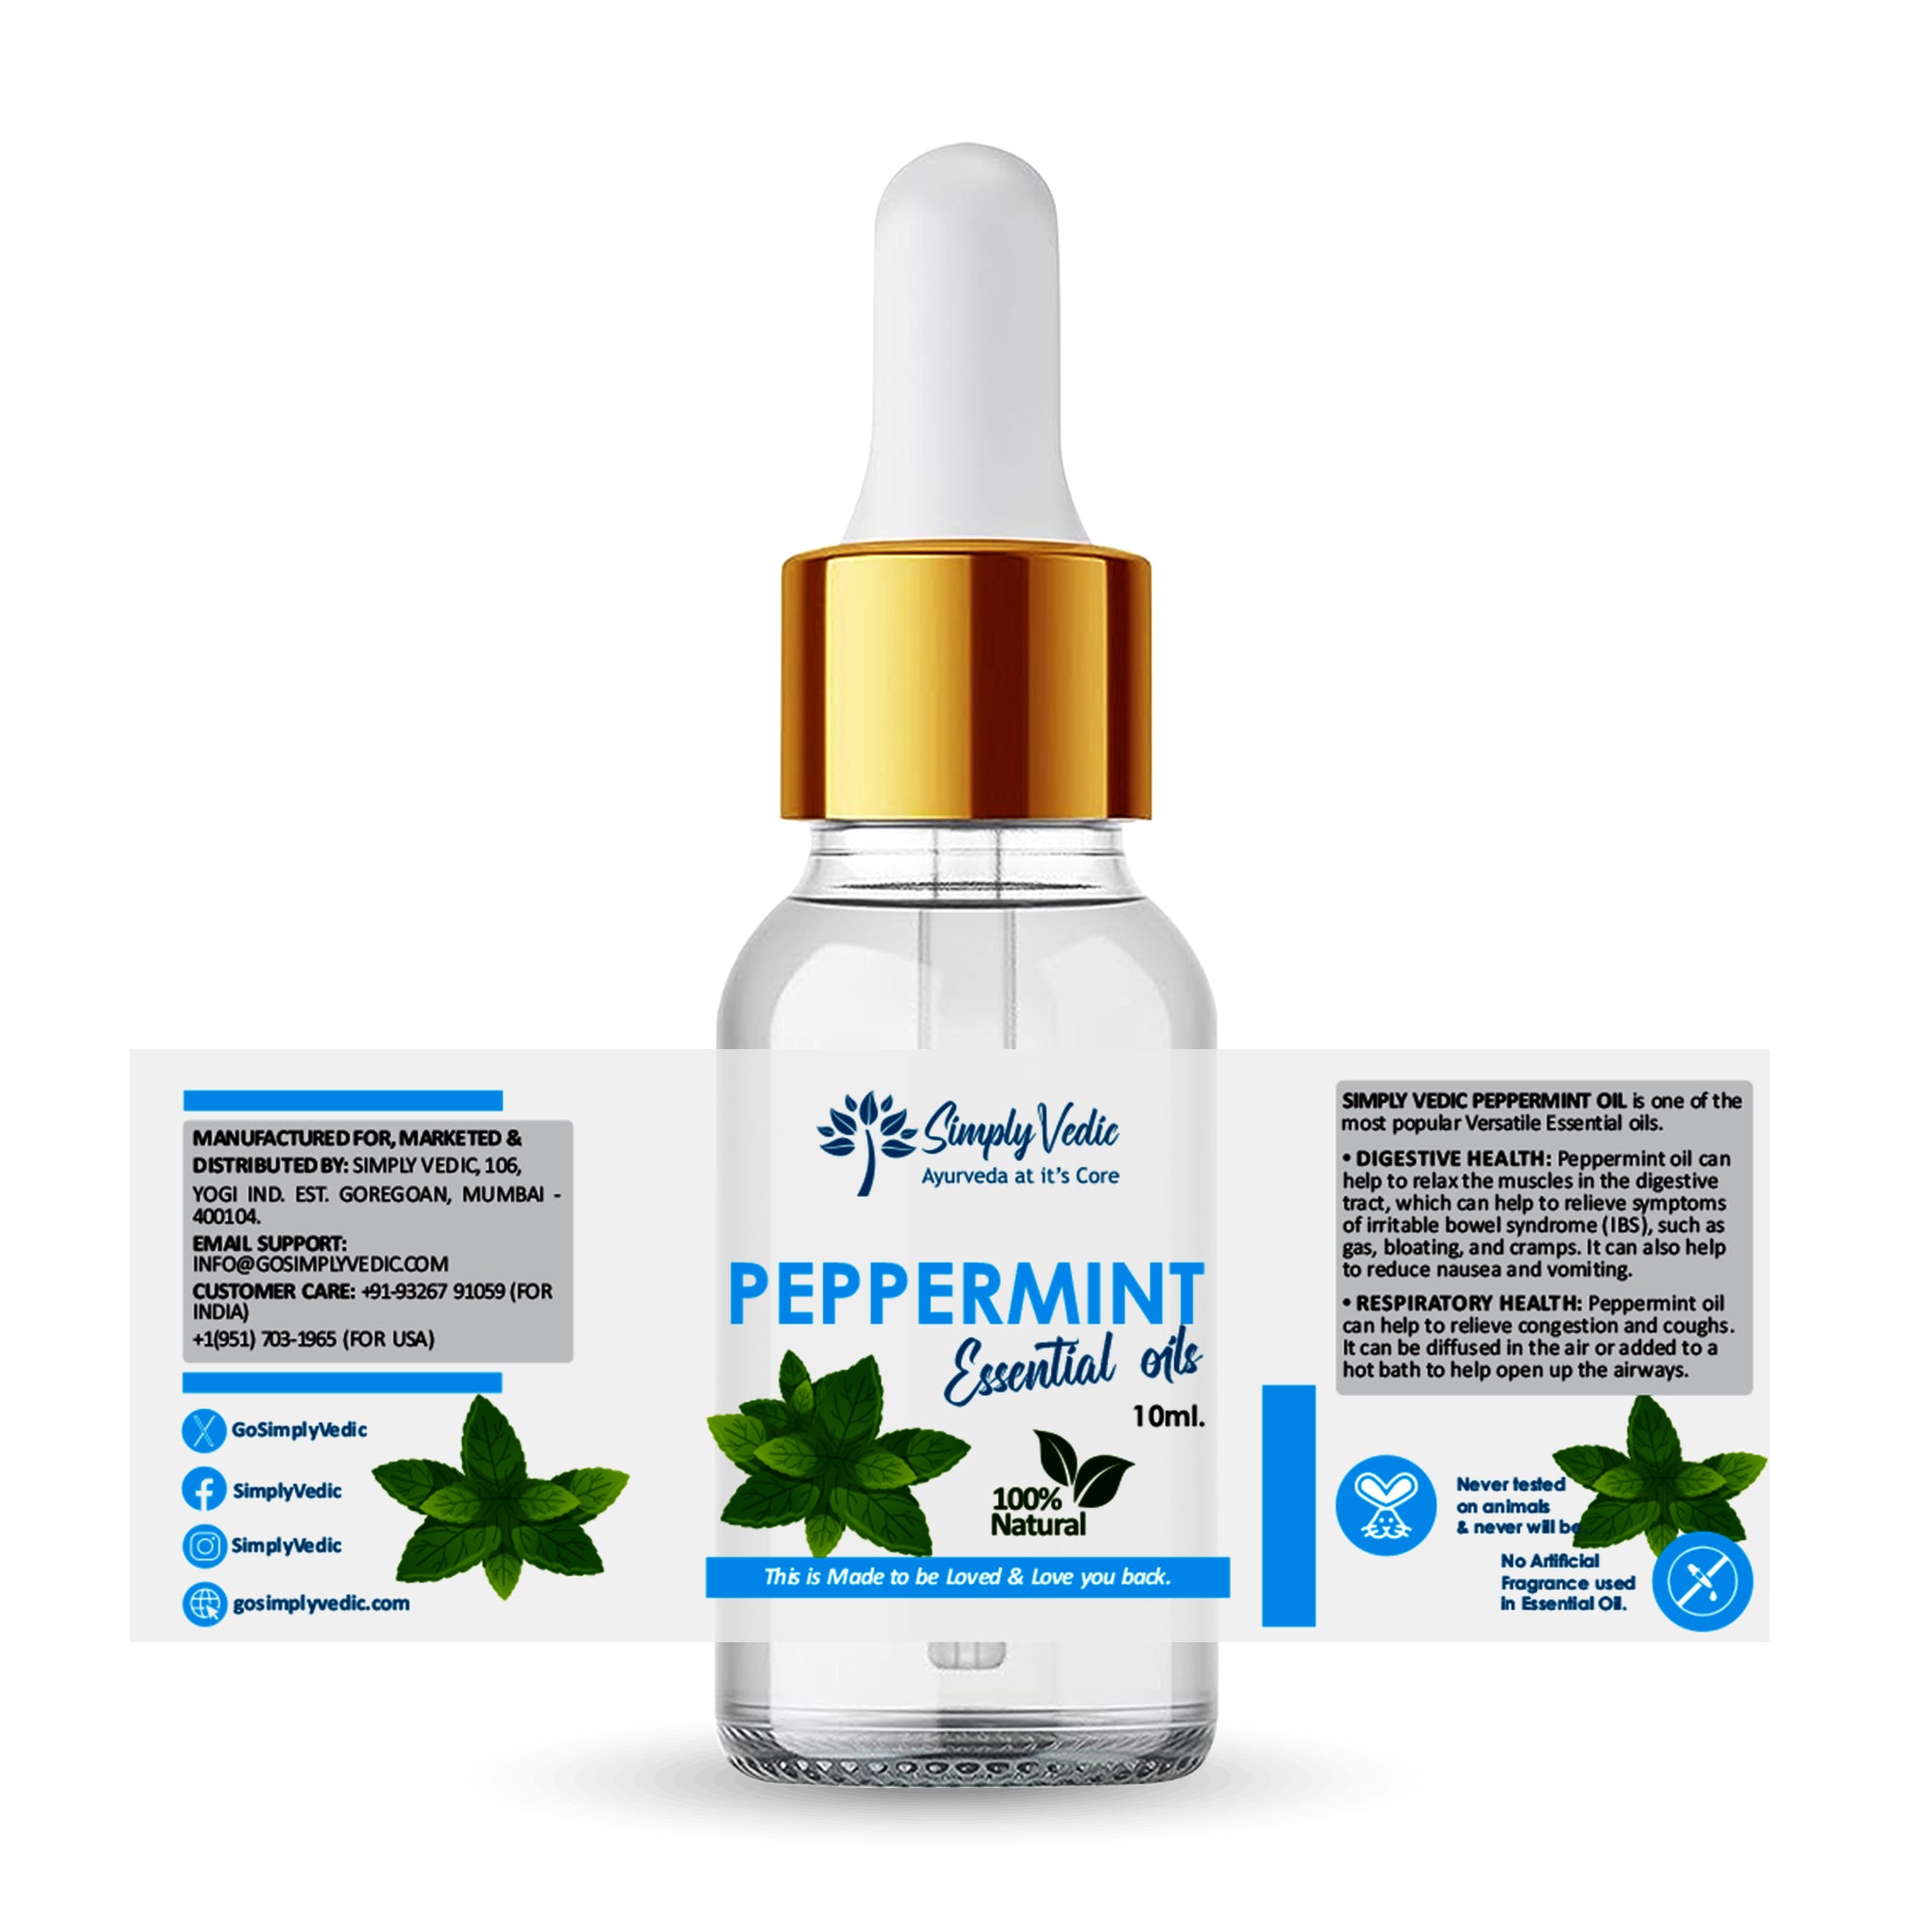 Simply Vedic Peppermint Essential Oil